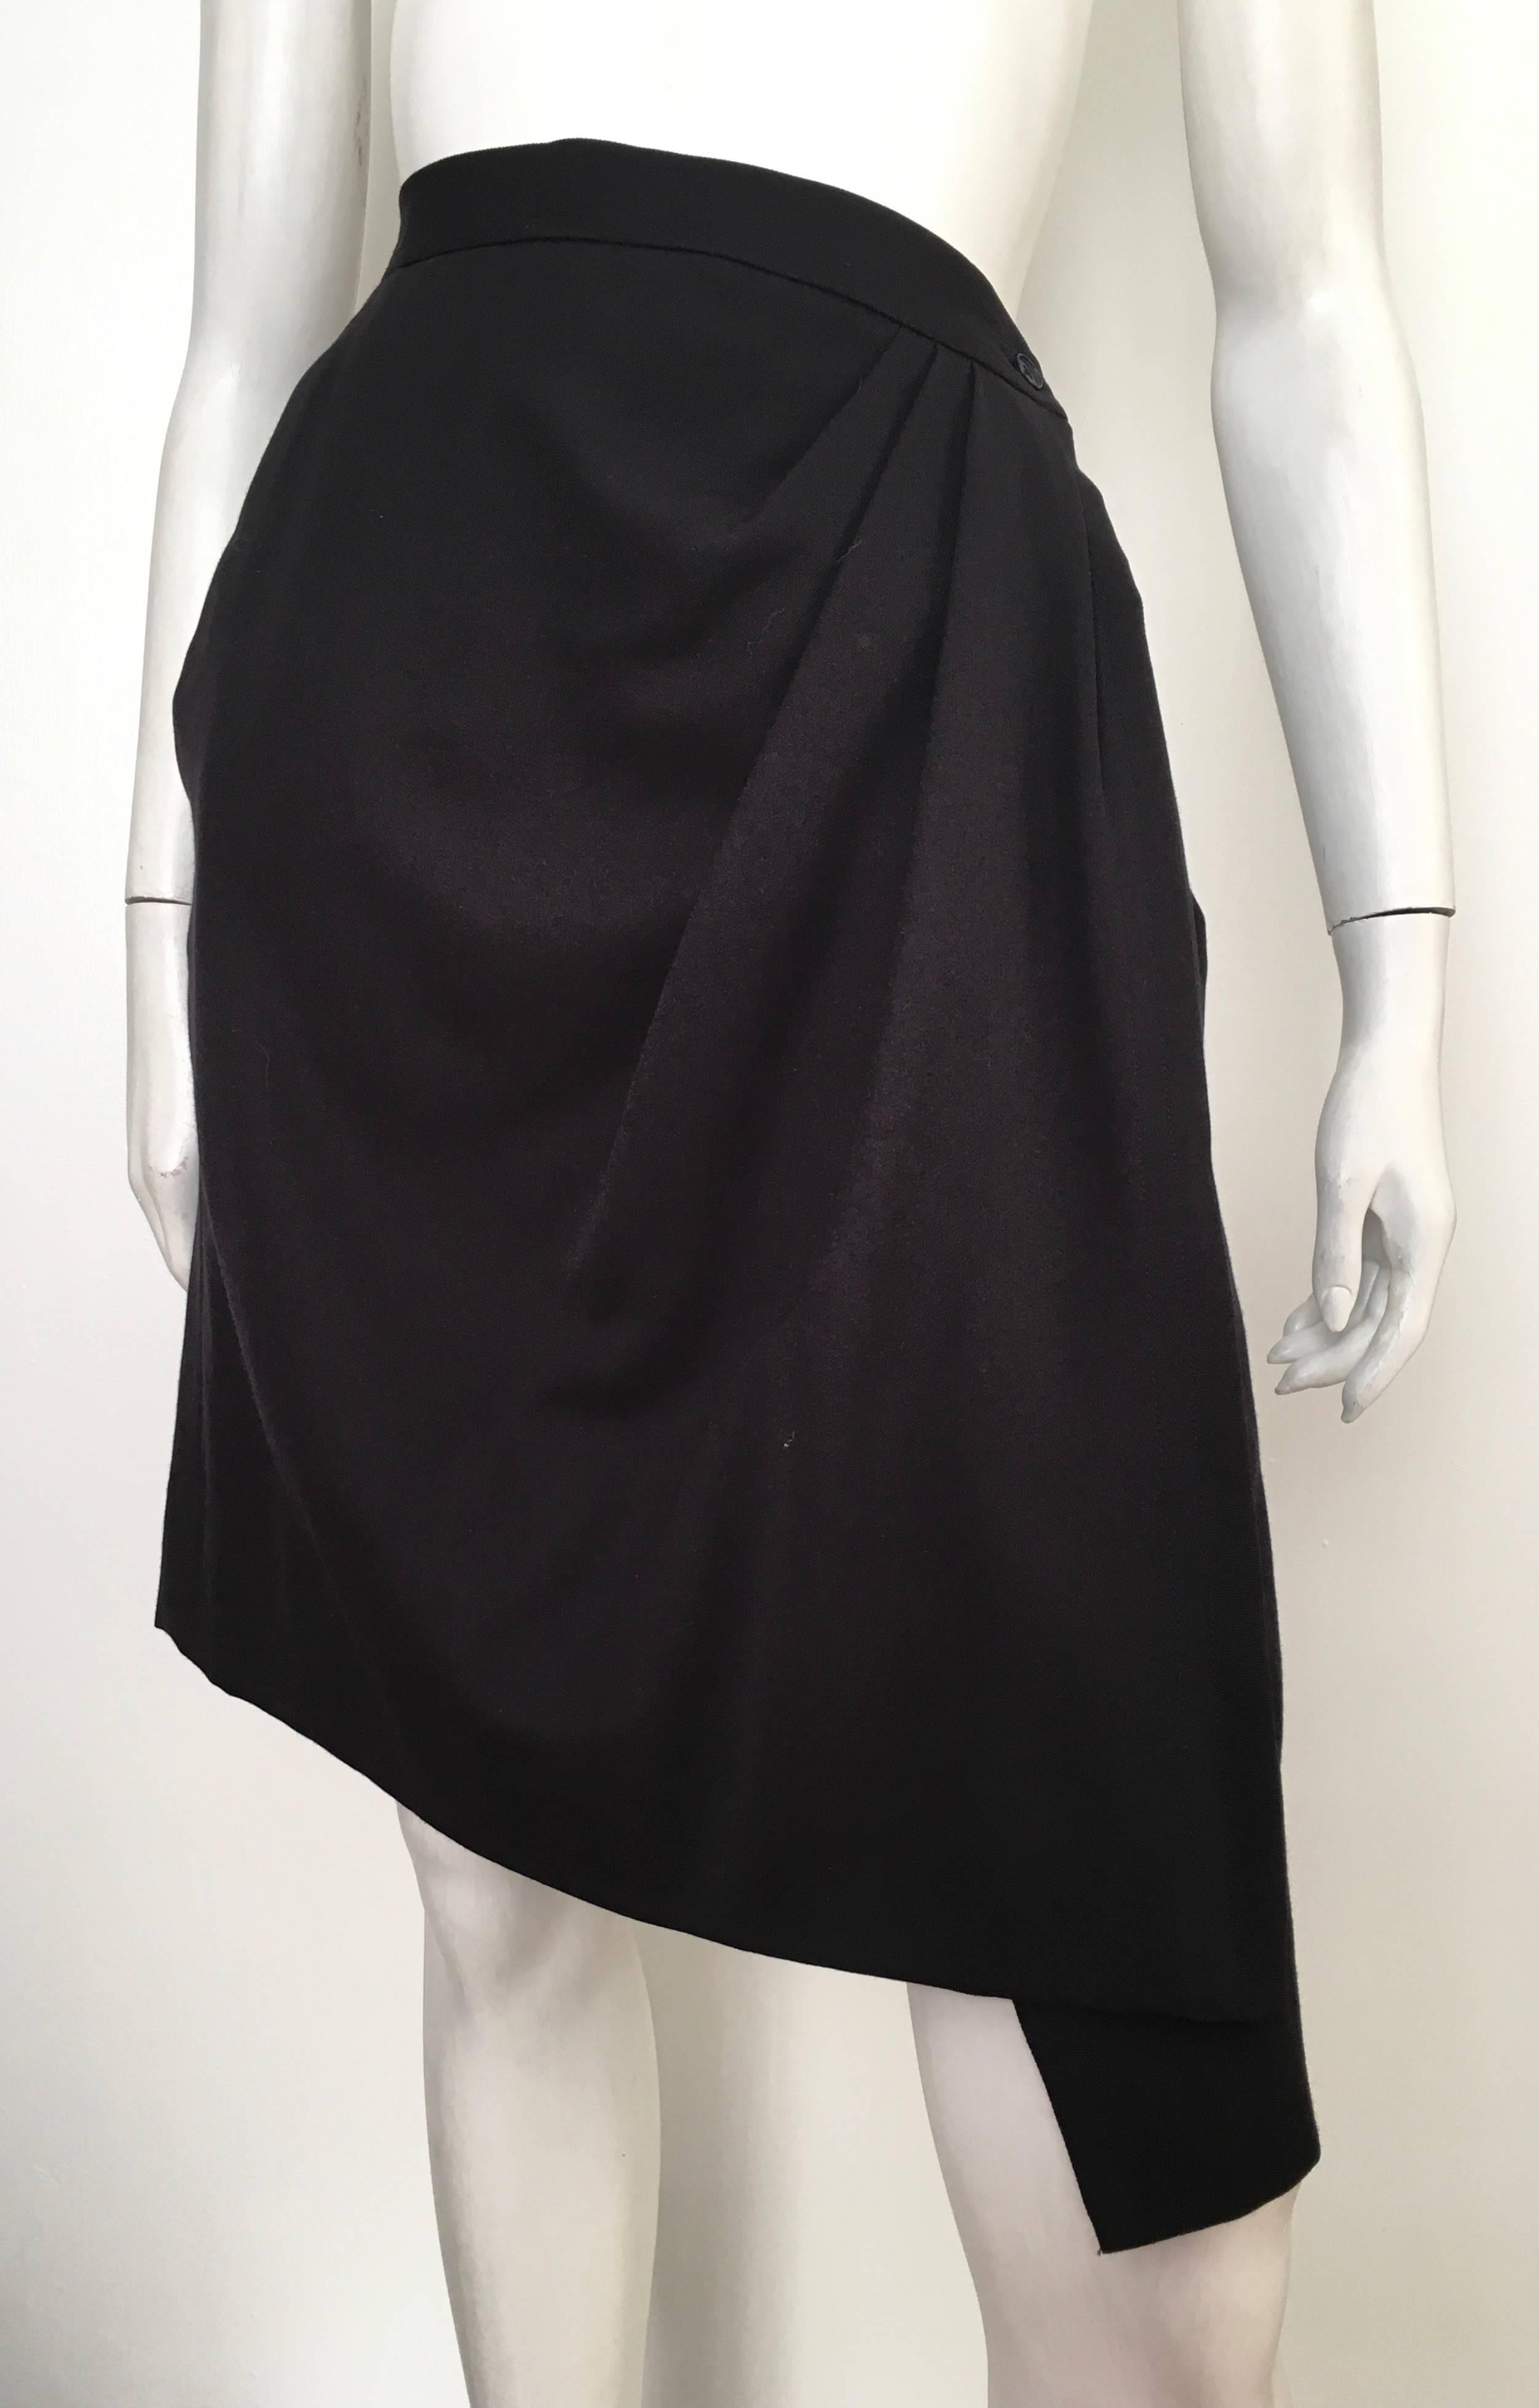 Yves Saint Laurent 1990s Black Wool Wrap Skirt with Pockets Size 6 / 8. For Sale 5